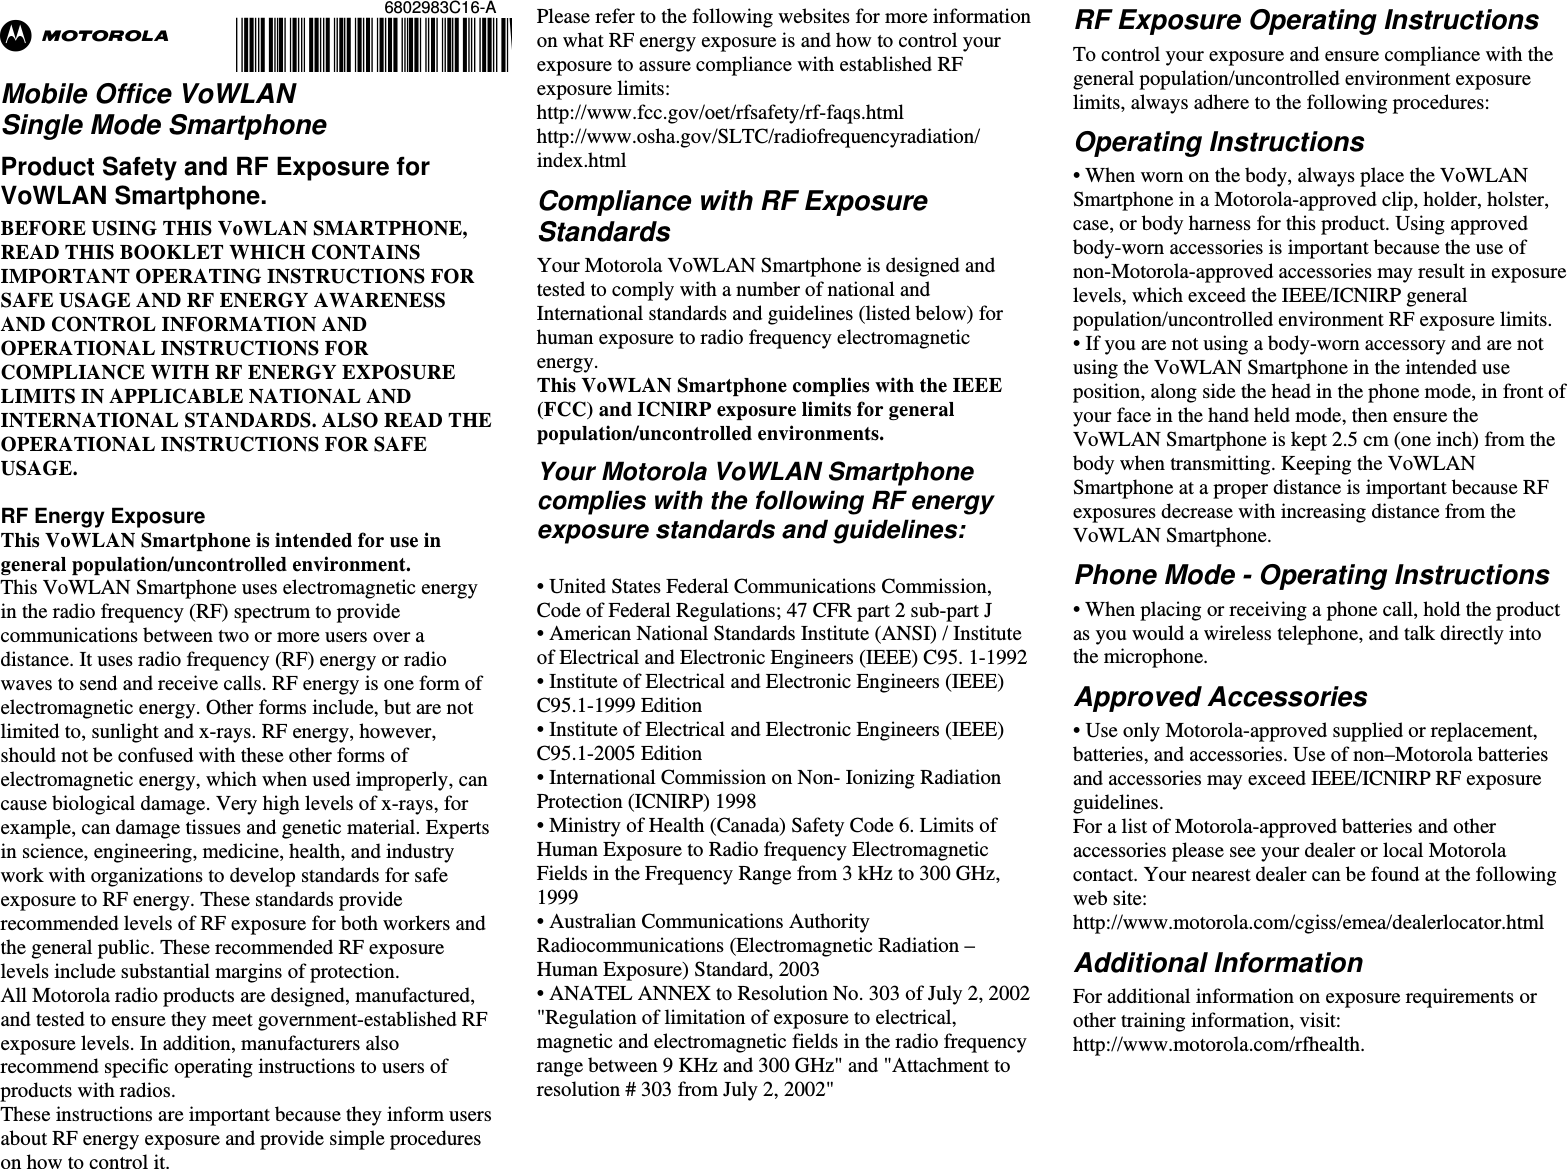 6802983C16-A @6802983C16@ Ab  Mobile Office VoWLAN Single Mode Smartphone Product Safety and RF Exposure for VoWLAN Smartphone. BEFORE USING THIS VoWLAN SMARTPHONE, READ THIS BOOKLET WHICH CONTAINS IMPORTANT OPERATING INSTRUCTIONS FOR SAFE USAGE AND RF ENERGY AWARENESS AND CONTROL INFORMATION AND OPERATIONAL INSTRUCTIONS FOR COMPLIANCE WITH RF ENERGY EXPOSURE LIMITS IN APPLICABLE NATIONAL AND INTERNATIONAL STANDARDS. ALSO READ THE OPERATIONAL INSTRUCTIONS FOR SAFE USAGE.   RF Energy Exposure  This VoWLAN Smartphone is intended for use in general population/uncontrolled environment. This VoWLAN Smartphone uses electromagnetic energy in the radio frequency (RF) spectrum to provide communications between two or more users over a distance. It uses radio frequency (RF) energy or radio waves to send and receive calls. RF energy is one form of electromagnetic energy. Other forms include, but are not limited to, sunlight and x-rays. RF energy, however, should not be confused with these other forms of electromagnetic energy, which when used improperly, can cause biological damage. Very high levels of x-rays, for example, can damage tissues and genetic material. Experts in science, engineering, medicine, health, and industry work with organizations to develop standards for safe exposure to RF energy. These standards provide recommended levels of RF exposure for both workers and the general public. These recommended RF exposure levels include substantial margins of protection. All Motorola radio products are designed, manufactured, and tested to ensure they meet government-established RF exposure levels. In addition, manufacturers also recommend specific operating instructions to users of products with radios.  These instructions are important because they inform users about RF energy exposure and provide simple procedures on how to control it. Please refer to the following websites for more information on what RF energy exposure is and how to control your exposure to assure compliance with established RF exposure limits: http://www.fcc.gov/oet/rfsafety/rf-faqs.html http://www.osha.gov/SLTC/radiofrequencyradiation/ index.html Compliance with RF Exposure Standards Your Motorola VoWLAN Smartphone is designed and tested to comply with a number of national and International standards and guidelines (listed below) for human exposure to radio frequency electromagnetic energy.  This VoWLAN Smartphone complies with the IEEE (FCC) and ICNIRP exposure limits for general population/uncontrolled environments.  Your Motorola VoWLAN Smartphone complies with the following RF energy exposure standards and guidelines:  • United States Federal Communications Commission, Code of Federal Regulations; 47 CFR part 2 sub-part J • American National Standards Institute (ANSI) / Institute of Electrical and Electronic Engineers (IEEE) C95. 1-1992 • Institute of Electrical and Electronic Engineers (IEEE) C95.1-1999 Edition • Institute of Electrical and Electronic Engineers (IEEE) C95.1-2005 Edition • International Commission on Non- Ionizing Radiation Protection (ICNIRP) 1998 • Ministry of Health (Canada) Safety Code 6. Limits of Human Exposure to Radio frequency Electromagnetic Fields in the Frequency Range from 3 kHz to 300 GHz, 1999 • Australian Communications Authority Radiocommunications (Electromagnetic Radiation – Human Exposure) Standard, 2003 • ANATEL ANNEX to Resolution No. 303 of July 2, 2002 &quot;Regulation of limitation of exposure to electrical, magnetic and electromagnetic fields in the radio frequency range between 9 KHz and 300 GHz&quot; and &quot;Attachment to resolution # 303 from July 2, 2002&quot;   RF Exposure Operating Instructions  To control your exposure and ensure compliance with the general population/uncontrolled environment exposure limits, always adhere to the following procedures: Operating Instructions • When worn on the body, always place the VoWLAN Smartphone in a Motorola-approved clip, holder, holster, case, or body harness for this product. Using approved body-worn accessories is important because the use of non-Motorola-approved accessories may result in exposure levels, which exceed the IEEE/ICNIRP general population/uncontrolled environment RF exposure limits. • If you are not using a body-worn accessory and are not using the VoWLAN Smartphone in the intended use position, along side the head in the phone mode, in front of your face in the hand held mode, then ensure the VoWLAN Smartphone is kept 2.5 cm (one inch) from the body when transmitting. Keeping the VoWLAN Smartphone at a proper distance is important because RF exposures decrease with increasing distance from the VoWLAN Smartphone. Phone Mode - Operating Instructions • When placing or receiving a phone call, hold the product as you would a wireless telephone, and talk directly into the microphone. Approved Accessories • Use only Motorola-approved supplied or replacement, batteries, and accessories. Use of non–Motorola batteries and accessories may exceed IEEE/ICNIRP RF exposure guidelines. For a list of Motorola-approved batteries and other accessories please see your dealer or local Motorola contact. Your nearest dealer can be found at the following web site: http://www.motorola.com/cgiss/emea/dealerlocator.html Additional Information For additional information on exposure requirements or other training information, visit: http://www.motorola.com/rfhealth.       